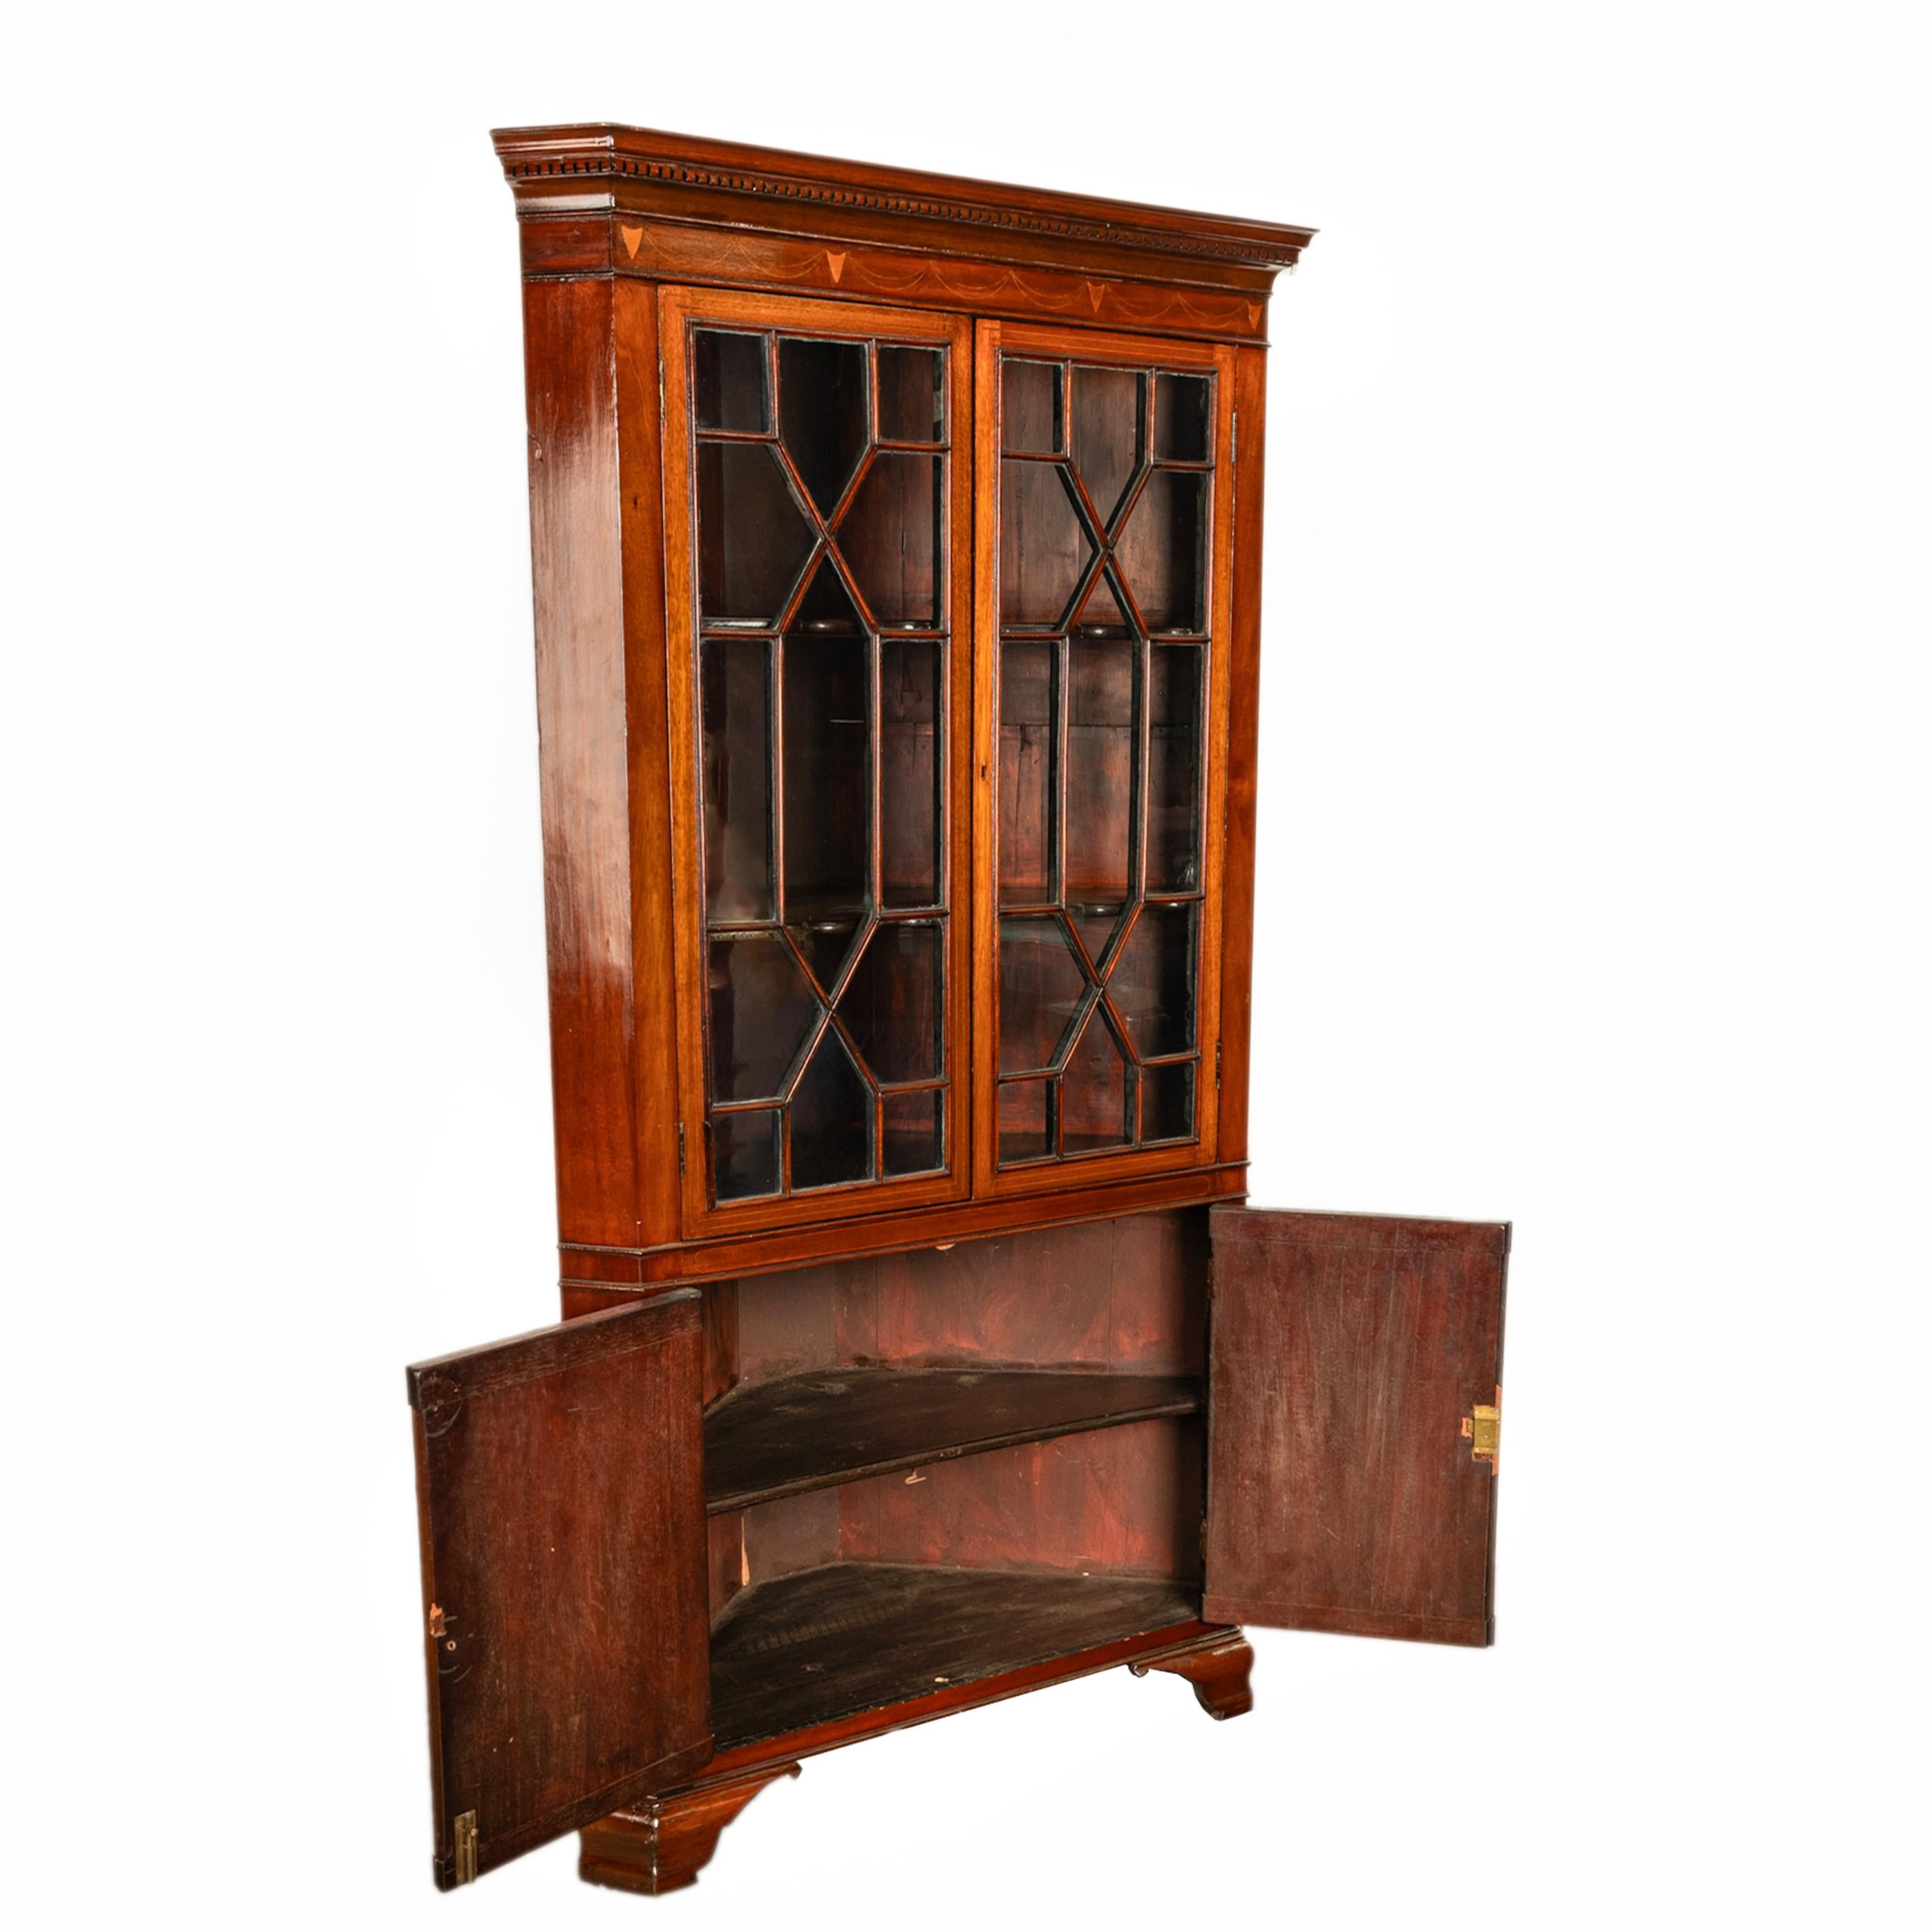 Antique 18th Century Georgian Inlaid Mahogany Freestanding Corner Cabinet 1790 In Good Condition For Sale In Portland, OR